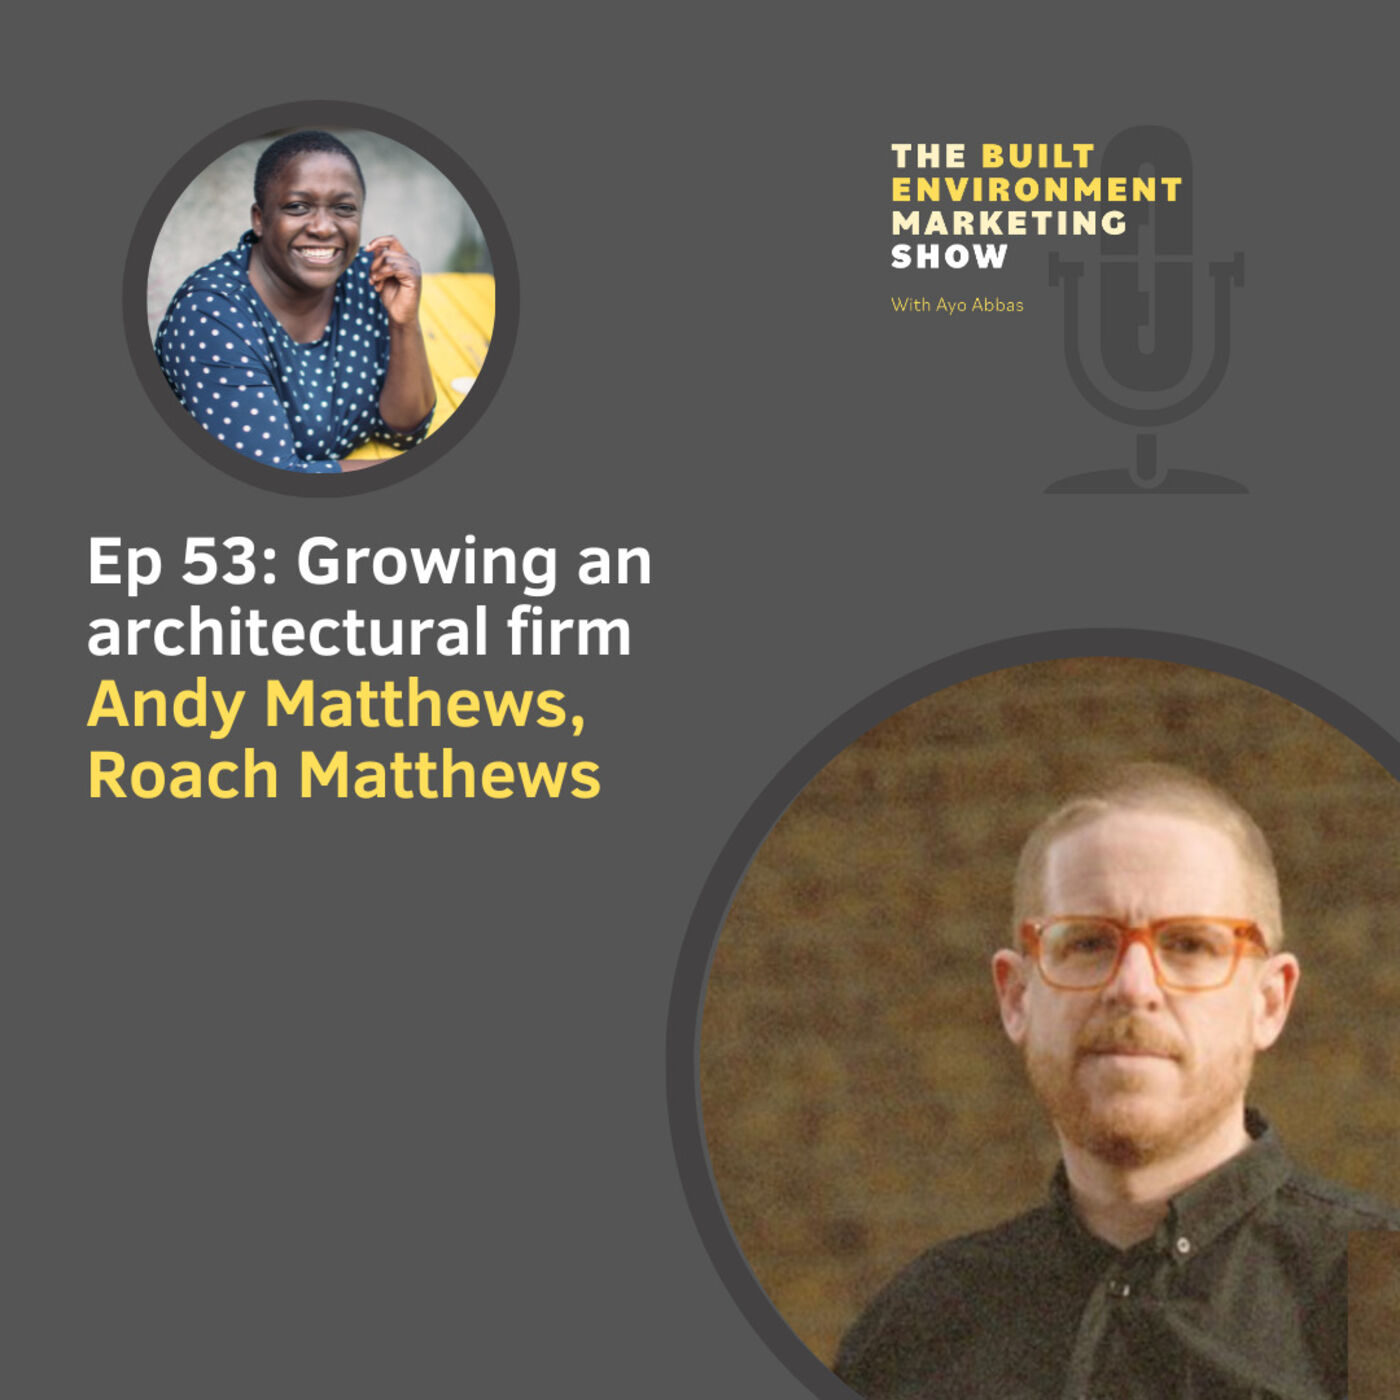 Ep 53: Growing an architectural firm with Andy Matthews, Roach Matthews